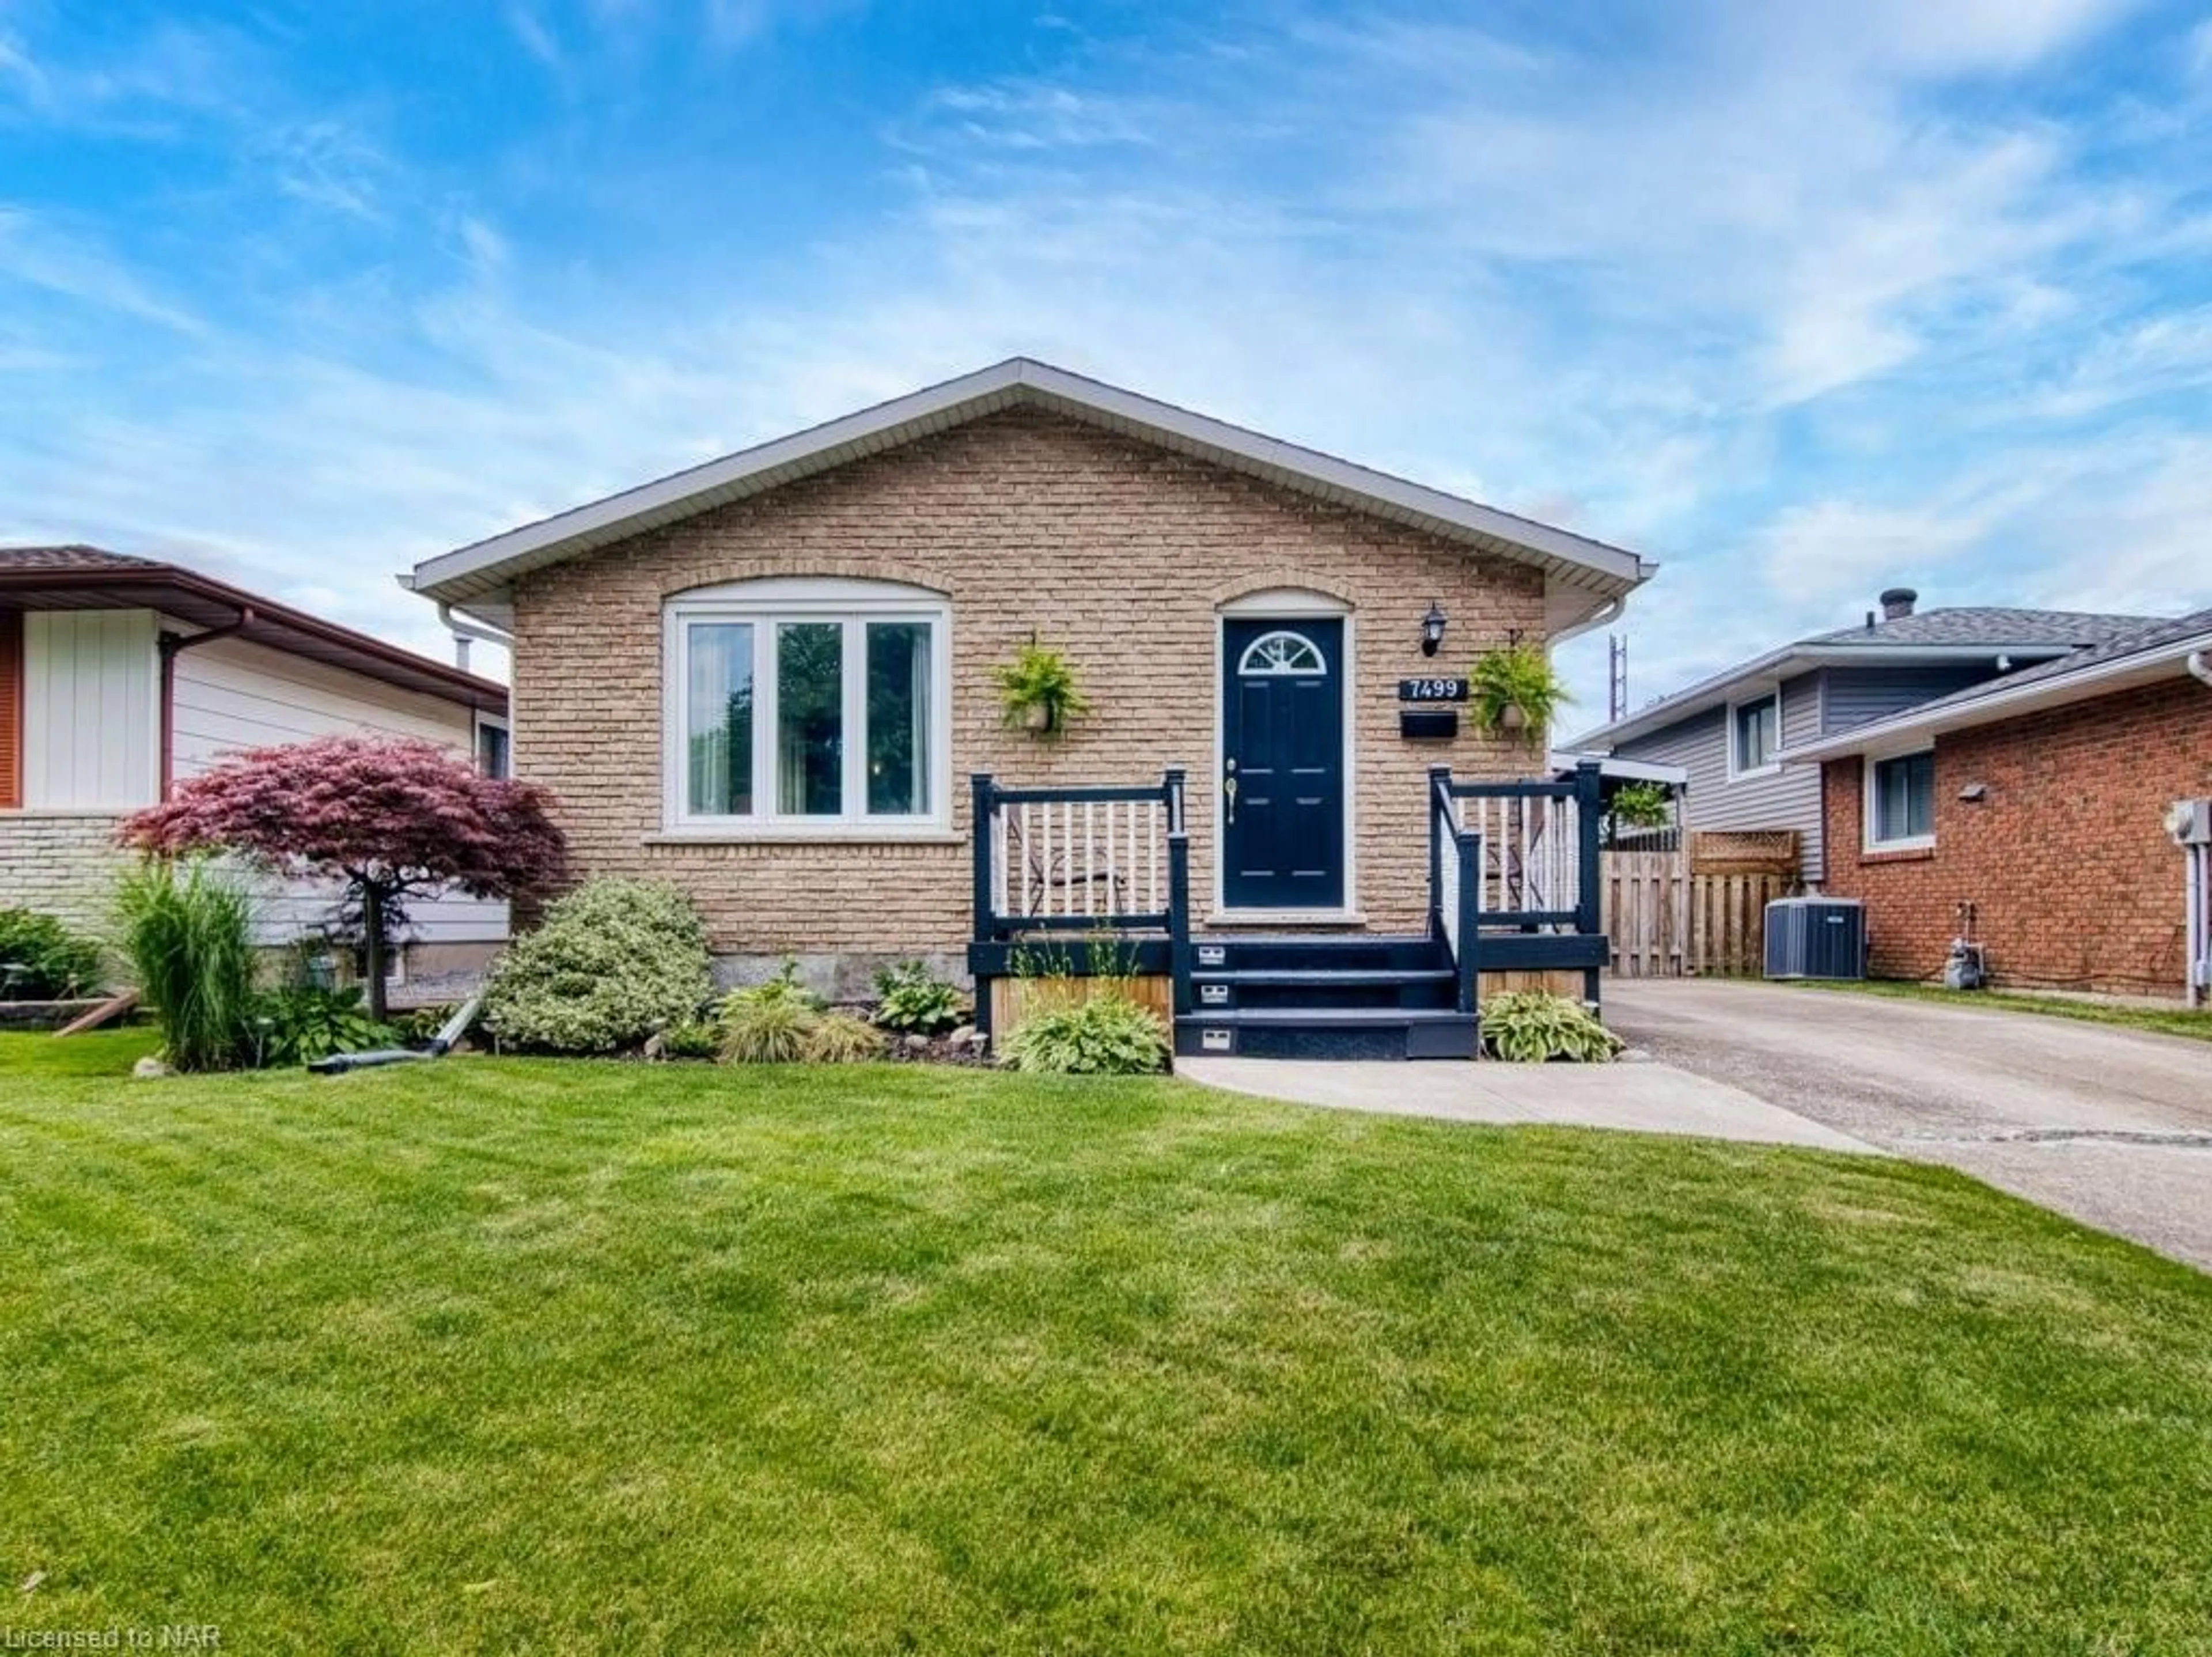 Frontside or backside of a home for 7499 Jubilee Dr, Niagara Falls Ontario L2G 7J2